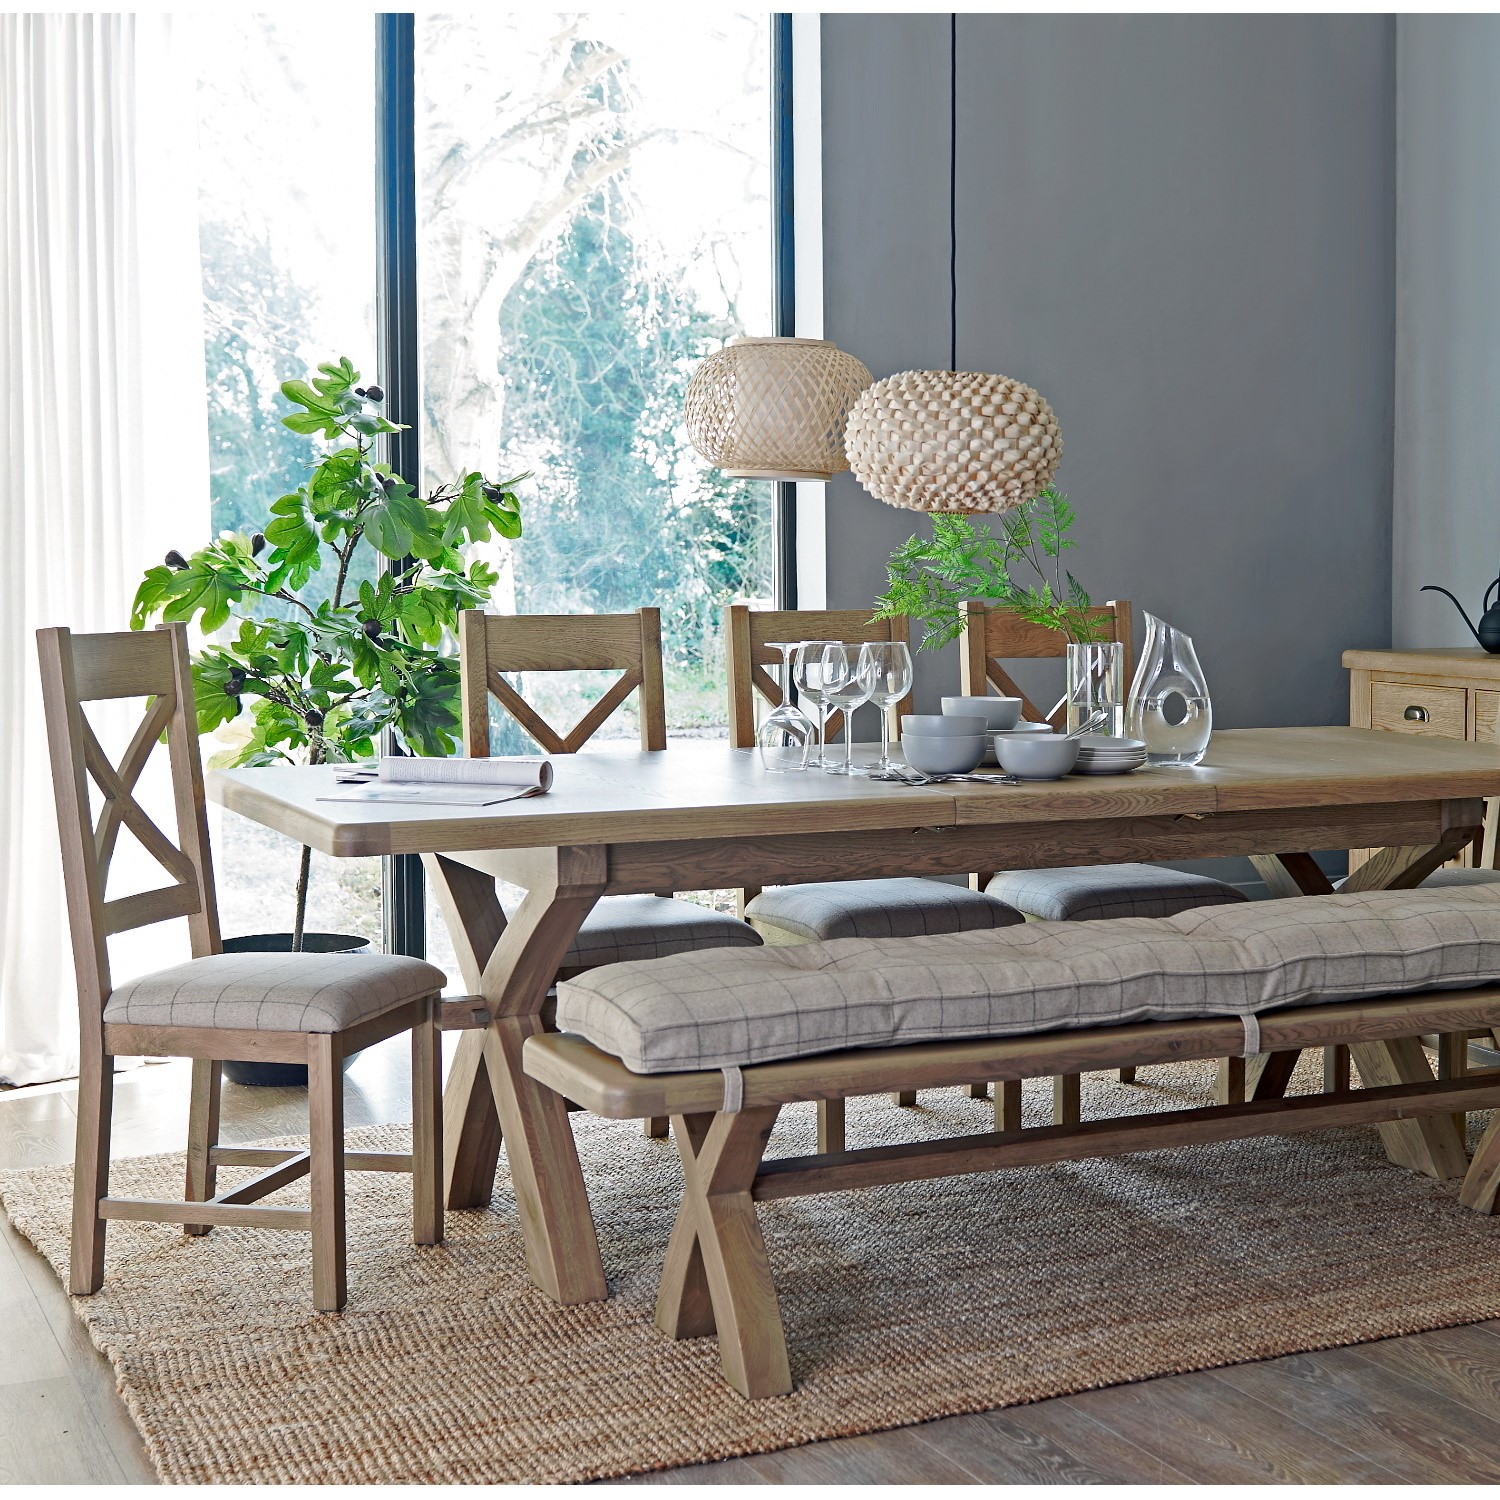 Oak 8 Seater Extendable Dining Table, Dining Room Bench Seat With Back